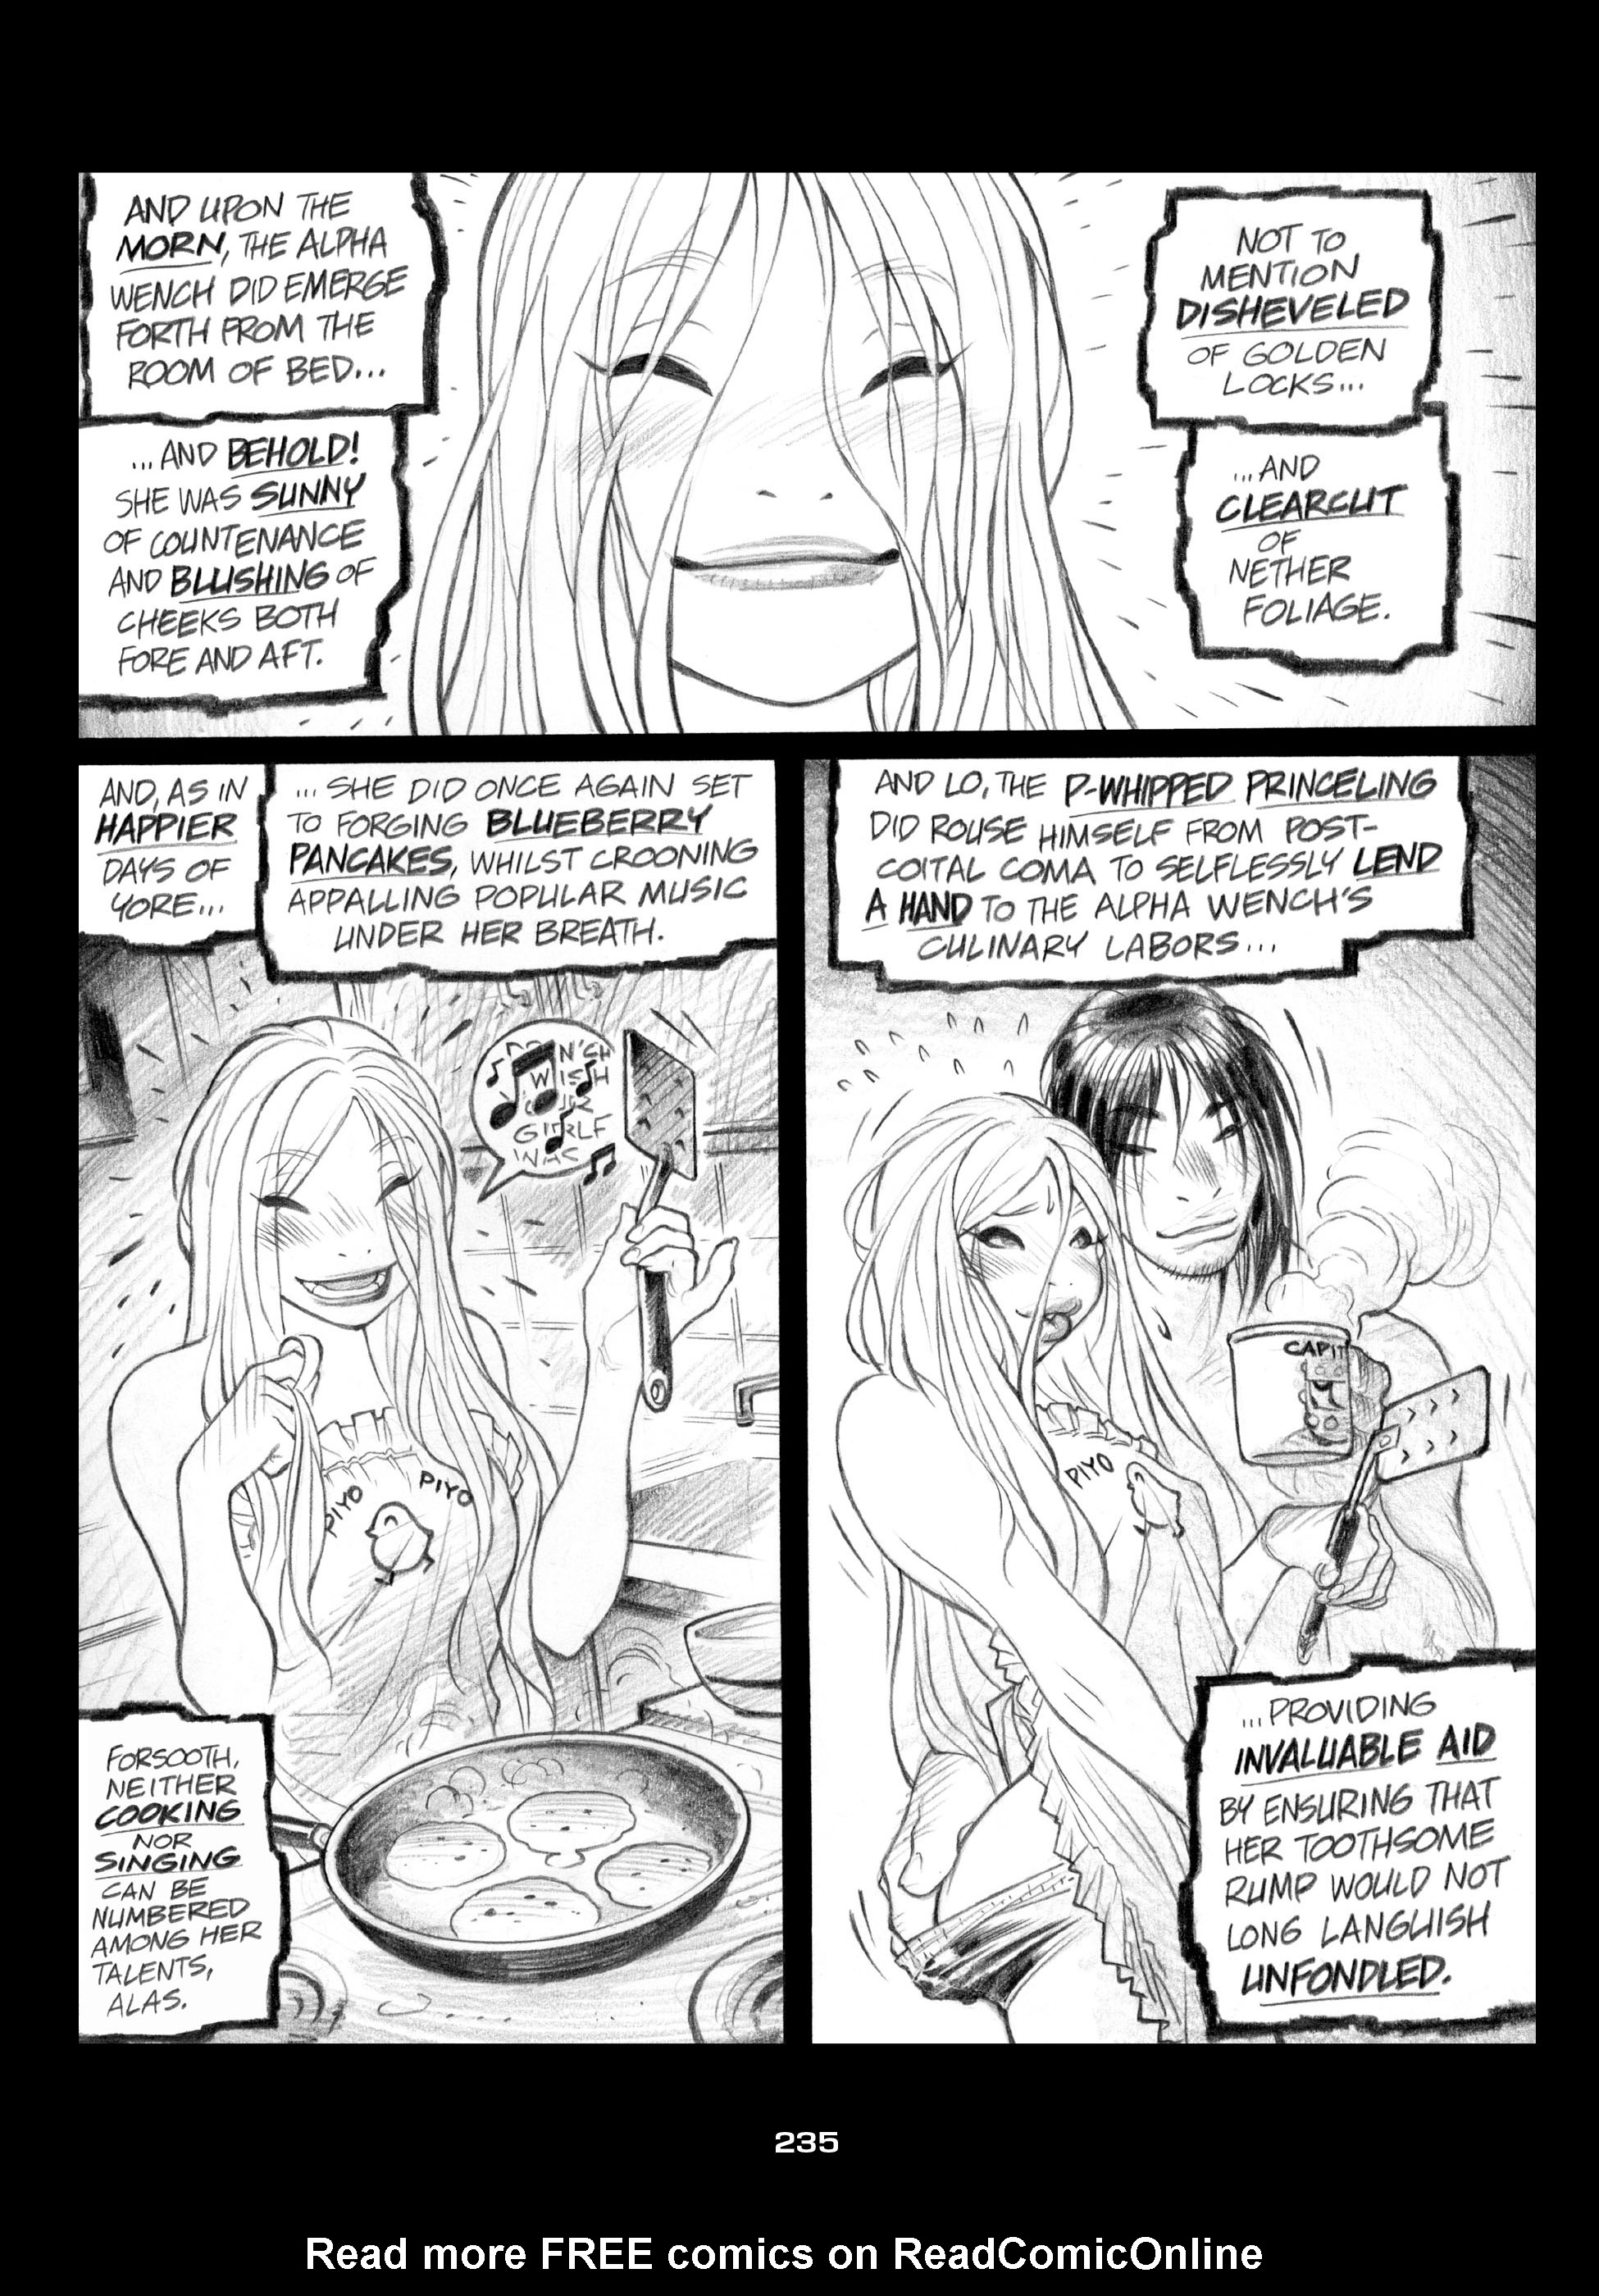 Read online Empowered comic -  Issue #1 - 235